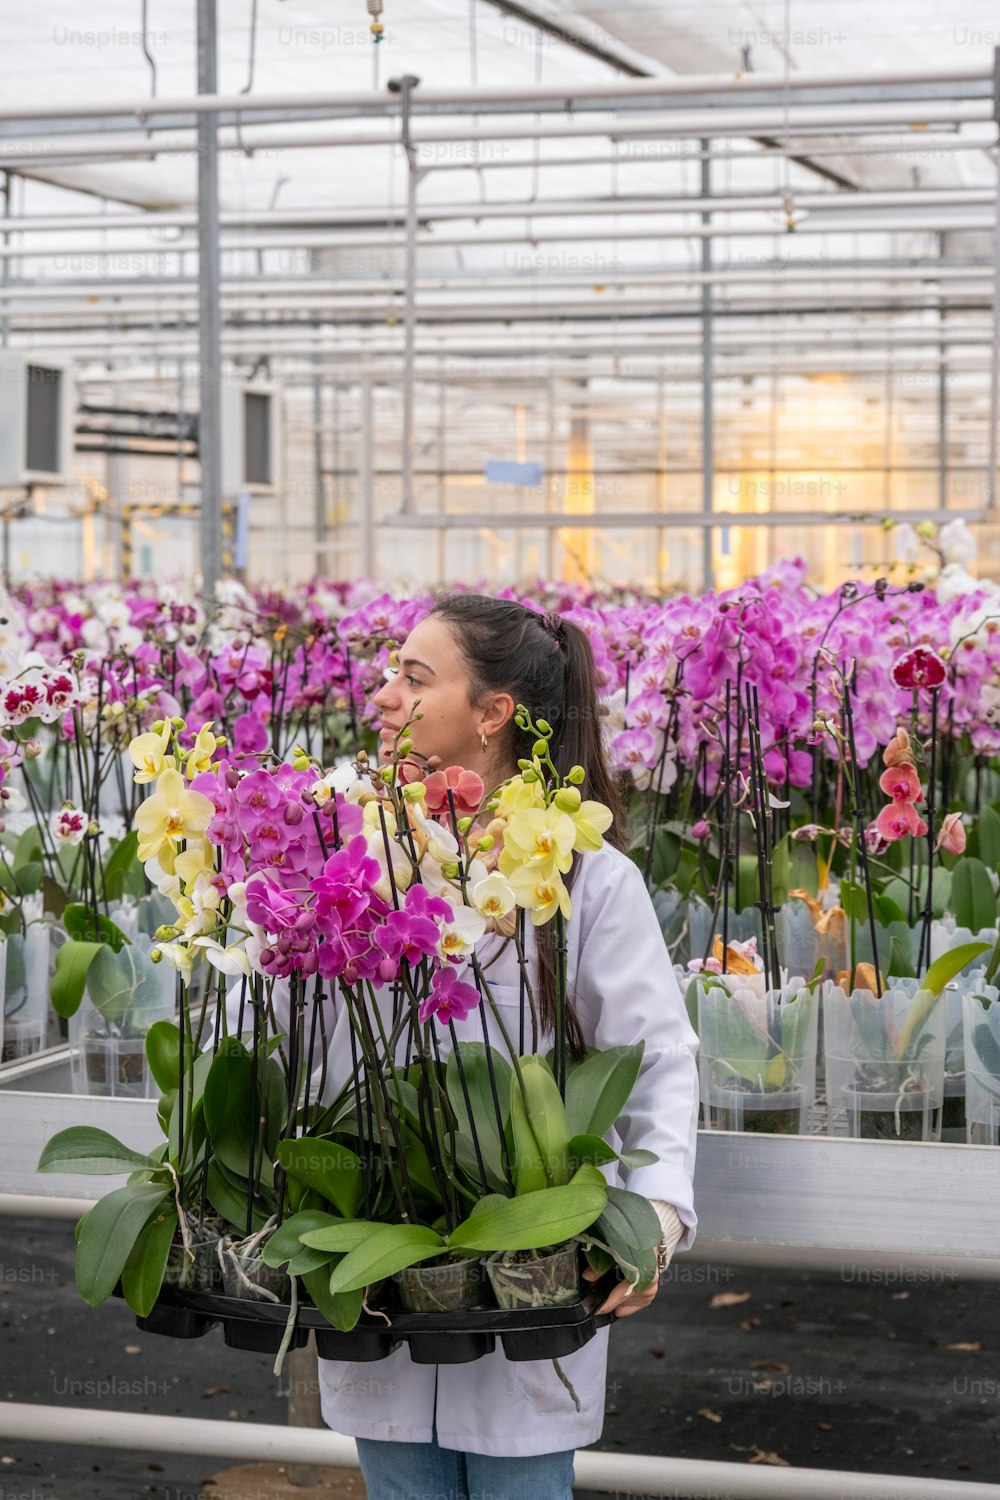 a woman holding a bunch of flowers in a greenhouse